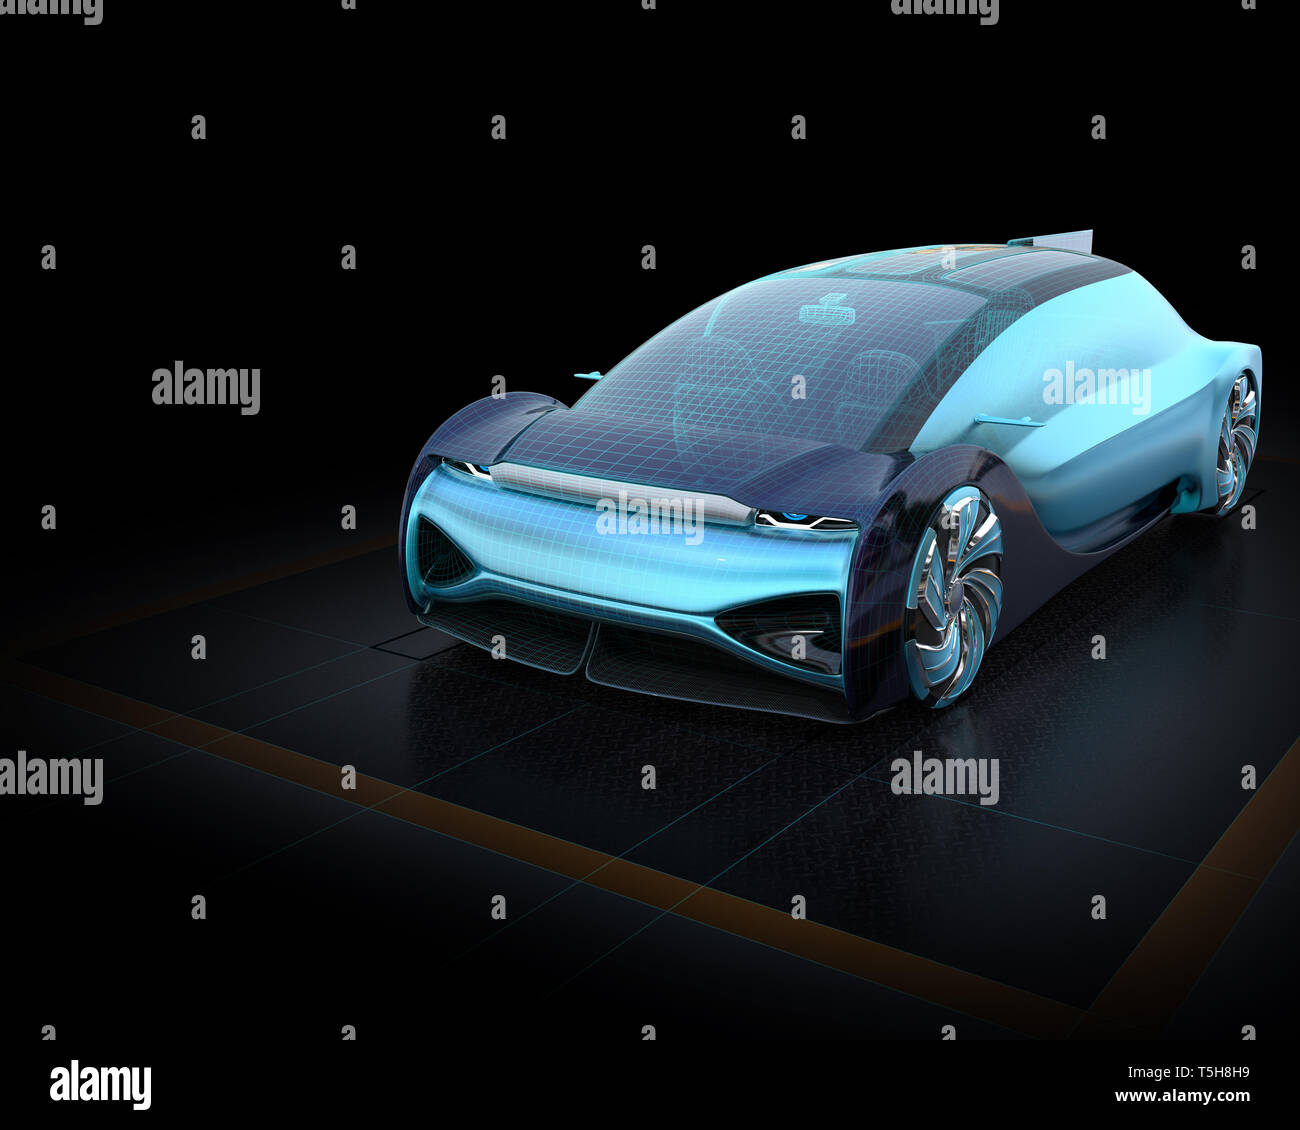 Wireframe rendering of electric car on dark background. 3D rendering image. Stock Photo